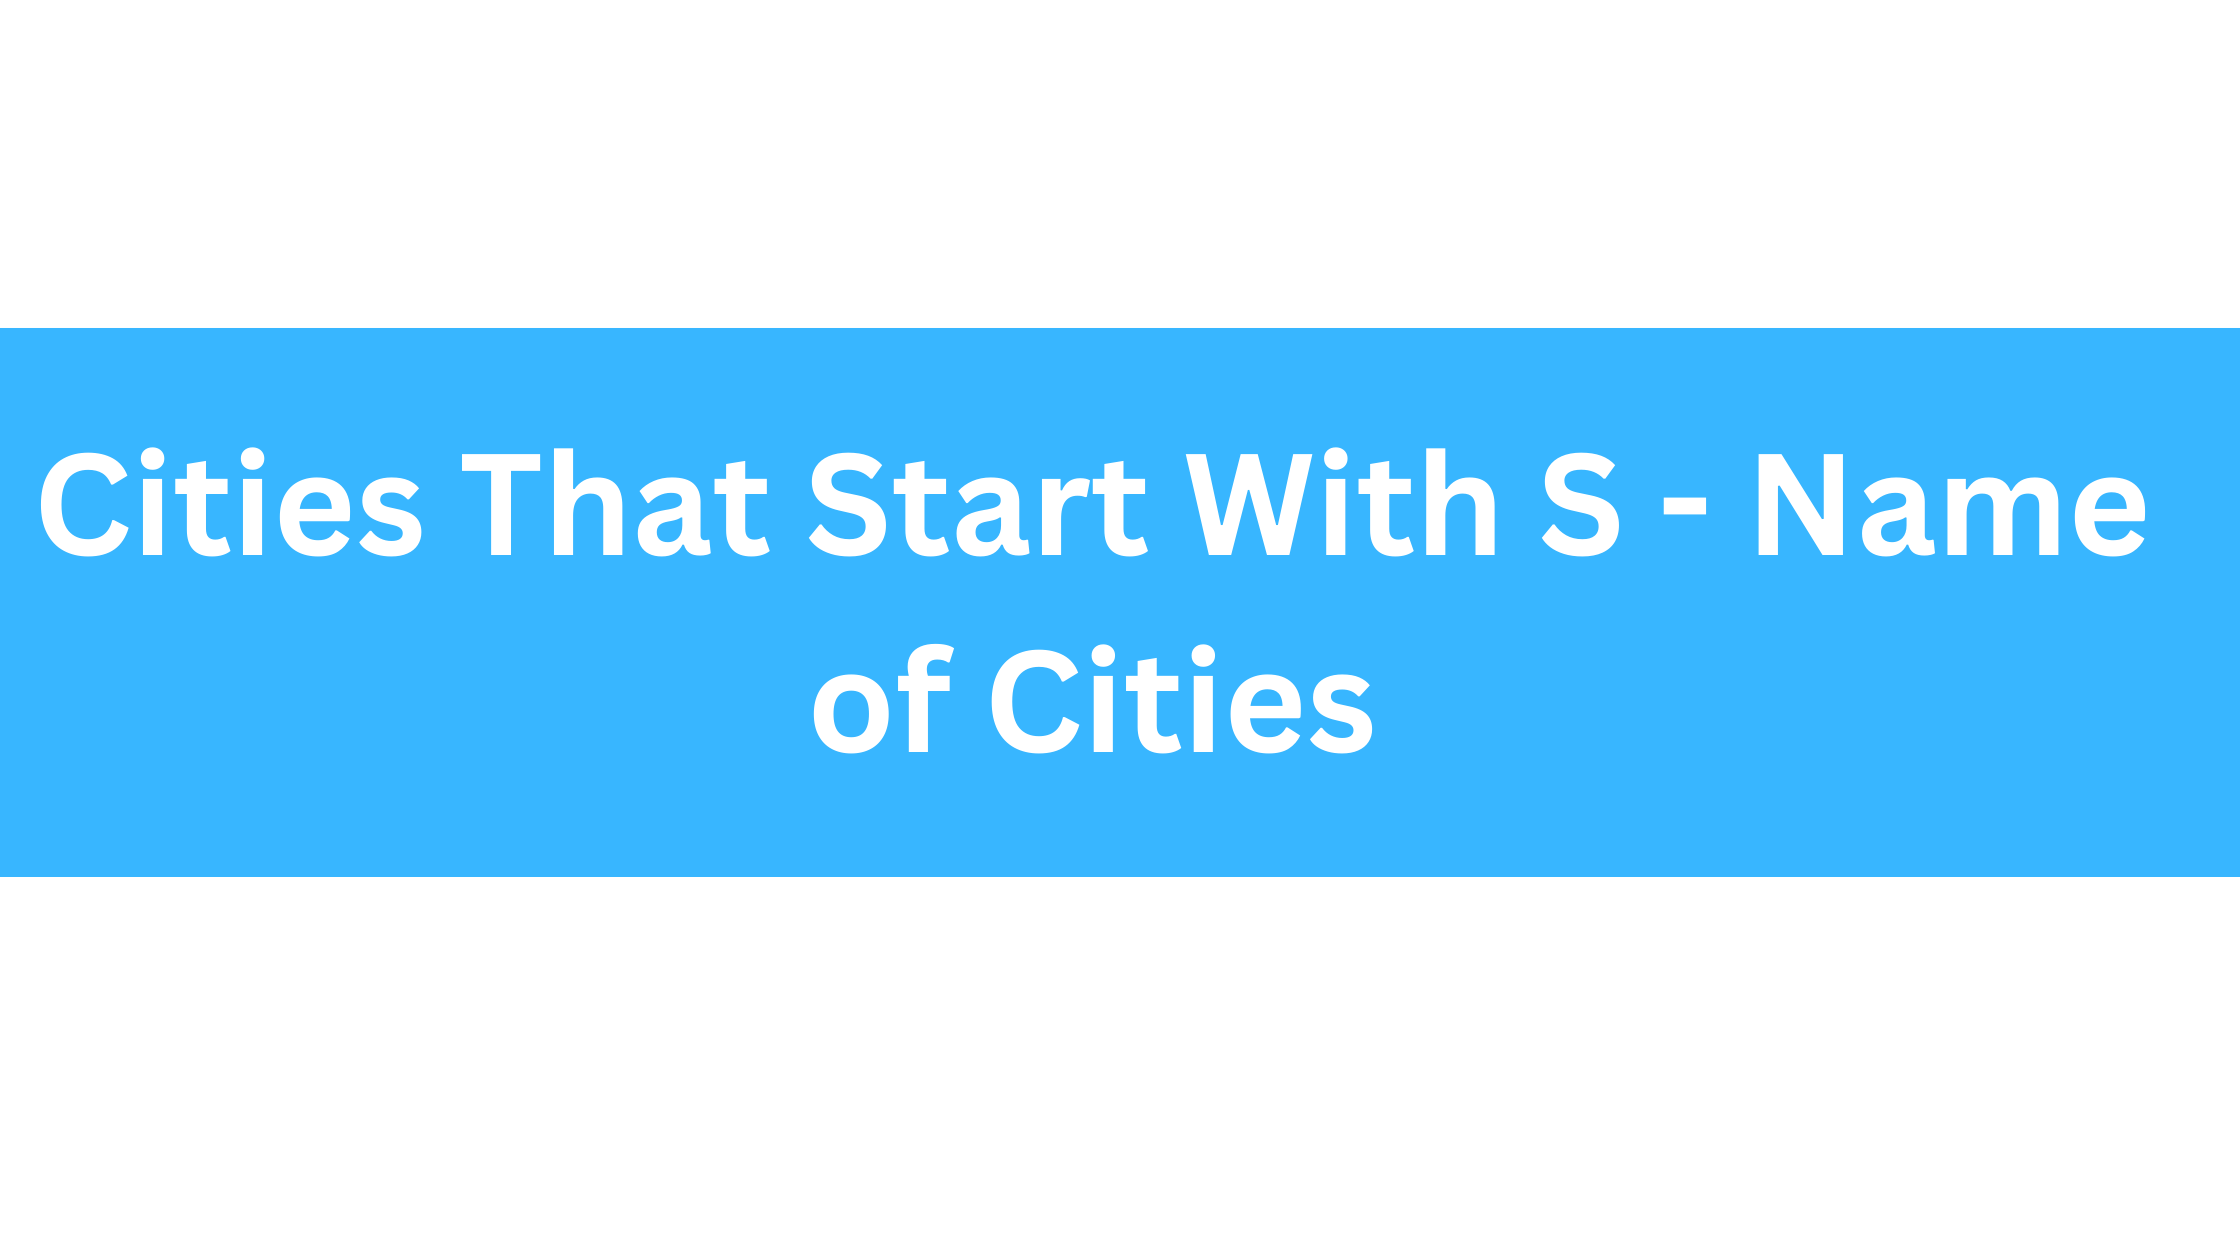 Cities That Start With S